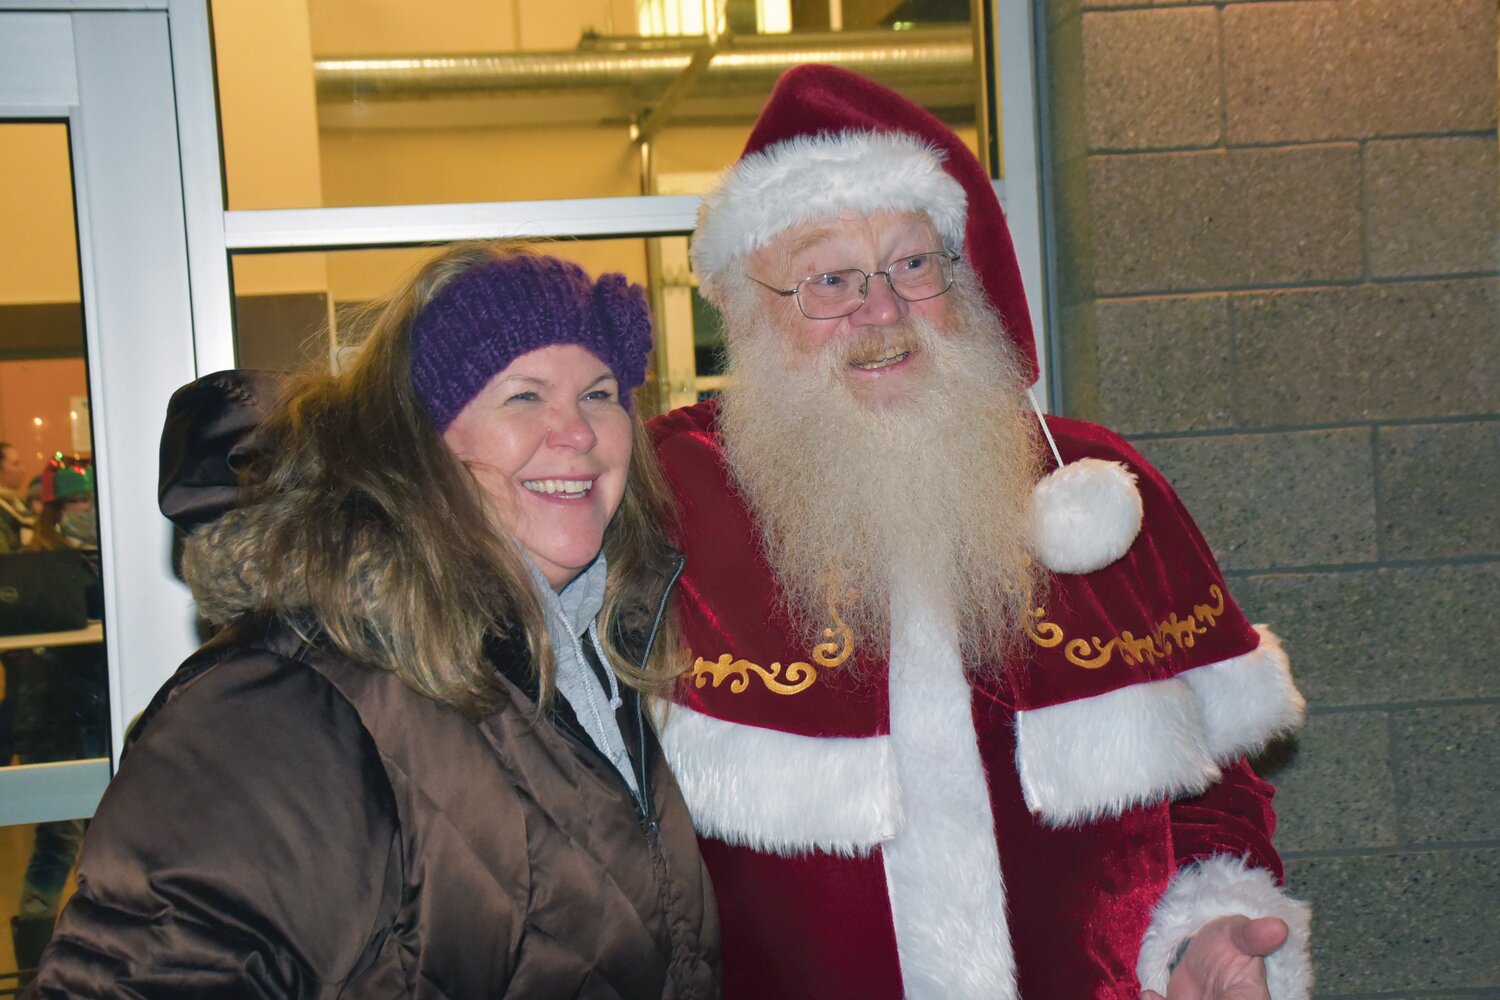 Harry Miller, as Santa, takes a photo with Holly Smith at a past Yelm Christmas tree lighting.